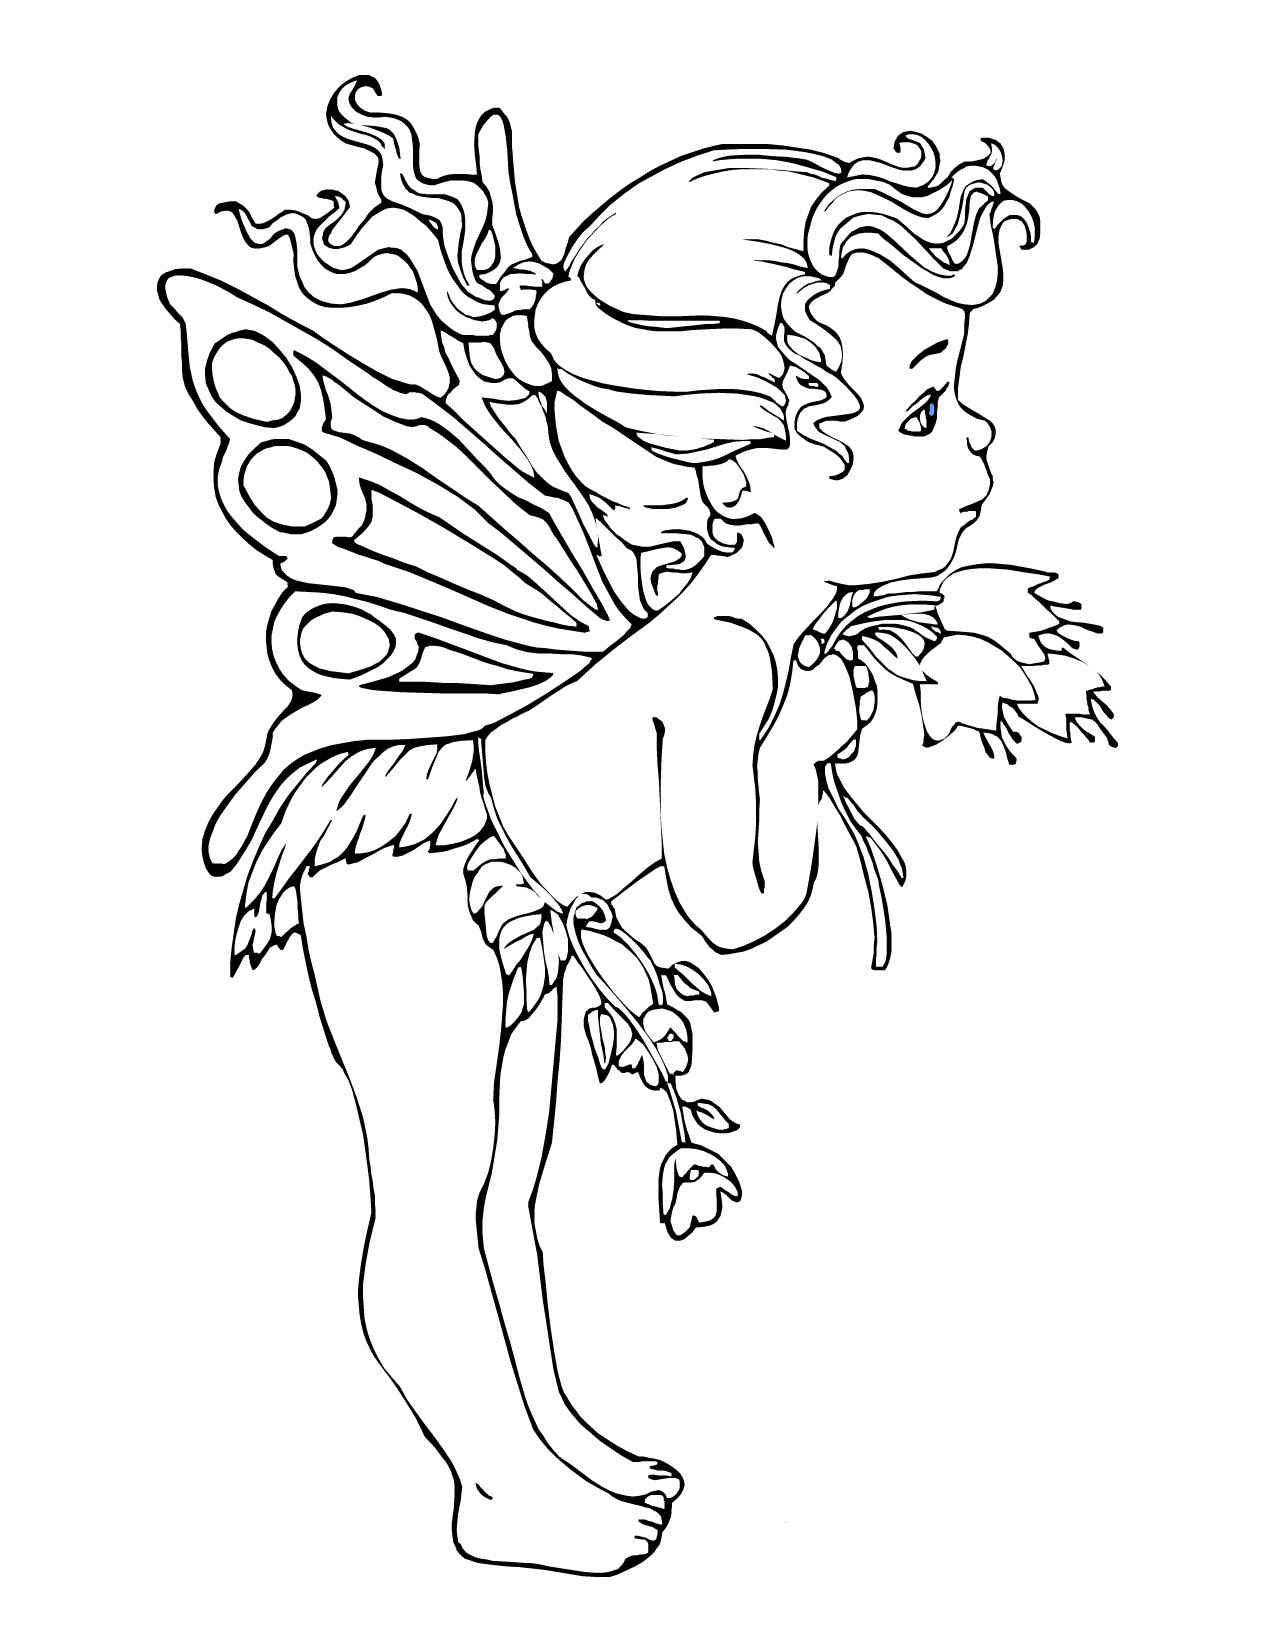 How to Draw a Fairy - Really Easy Drawing Tutorial